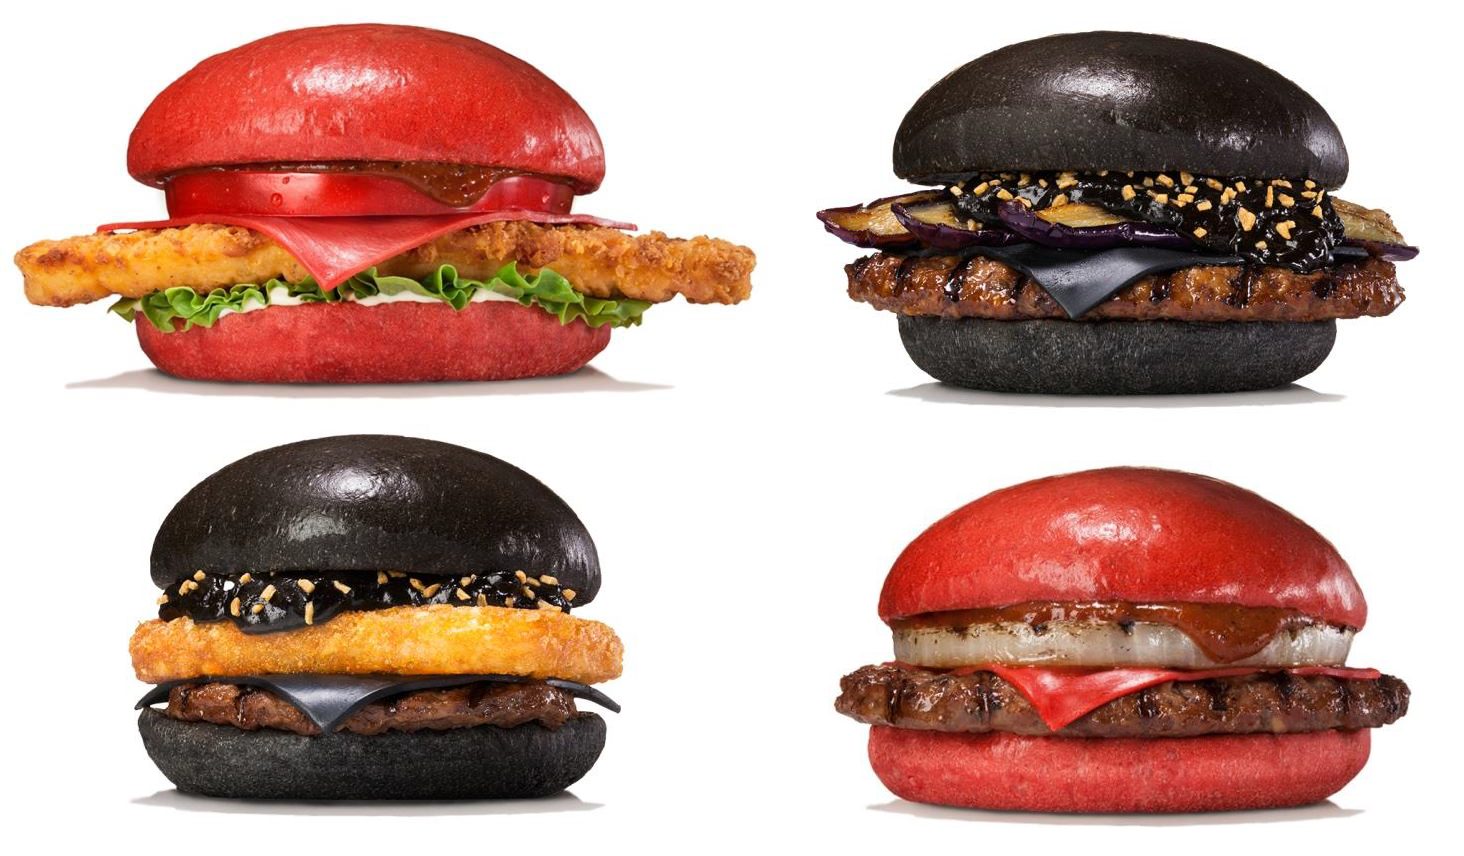 højde Primitiv Alligevel Red is the new black (burger) as Burger King rolls out sandwiches with  crimson buns and cheese | SoraNews24 -Japan News-